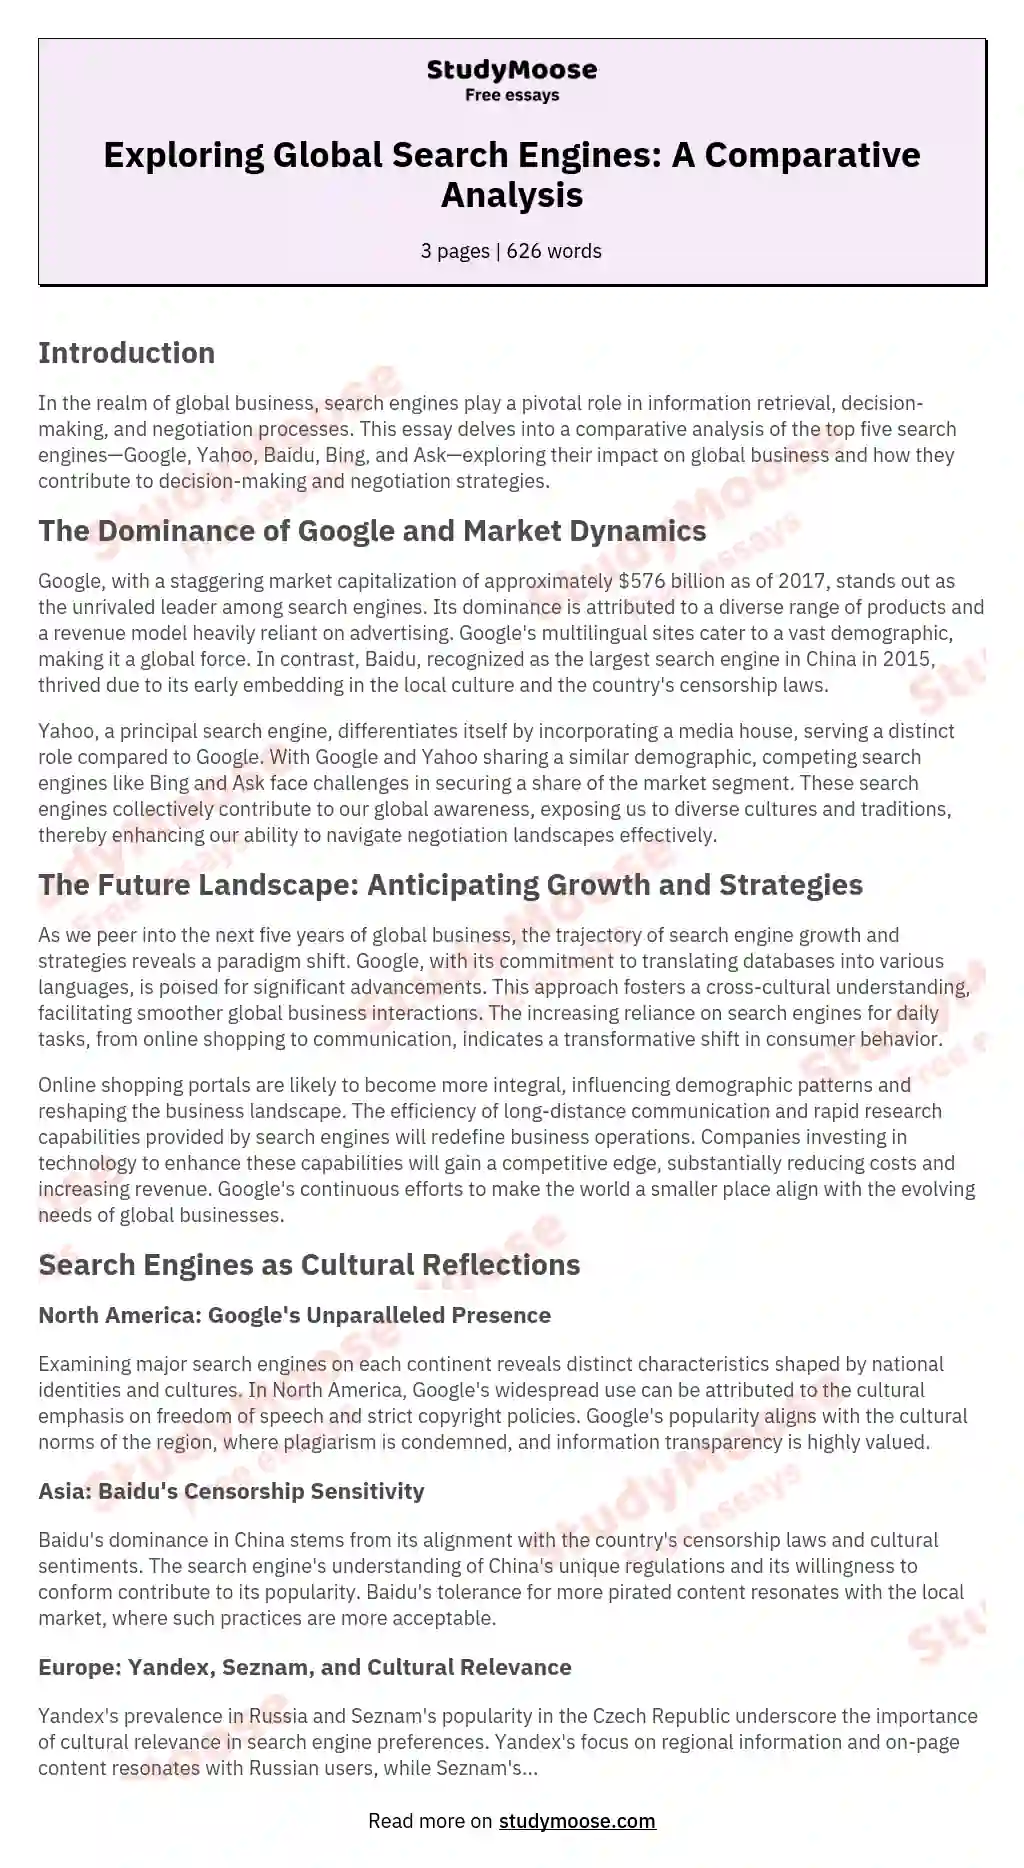 Exploring Global Search Engines: A Comparative Analysis essay